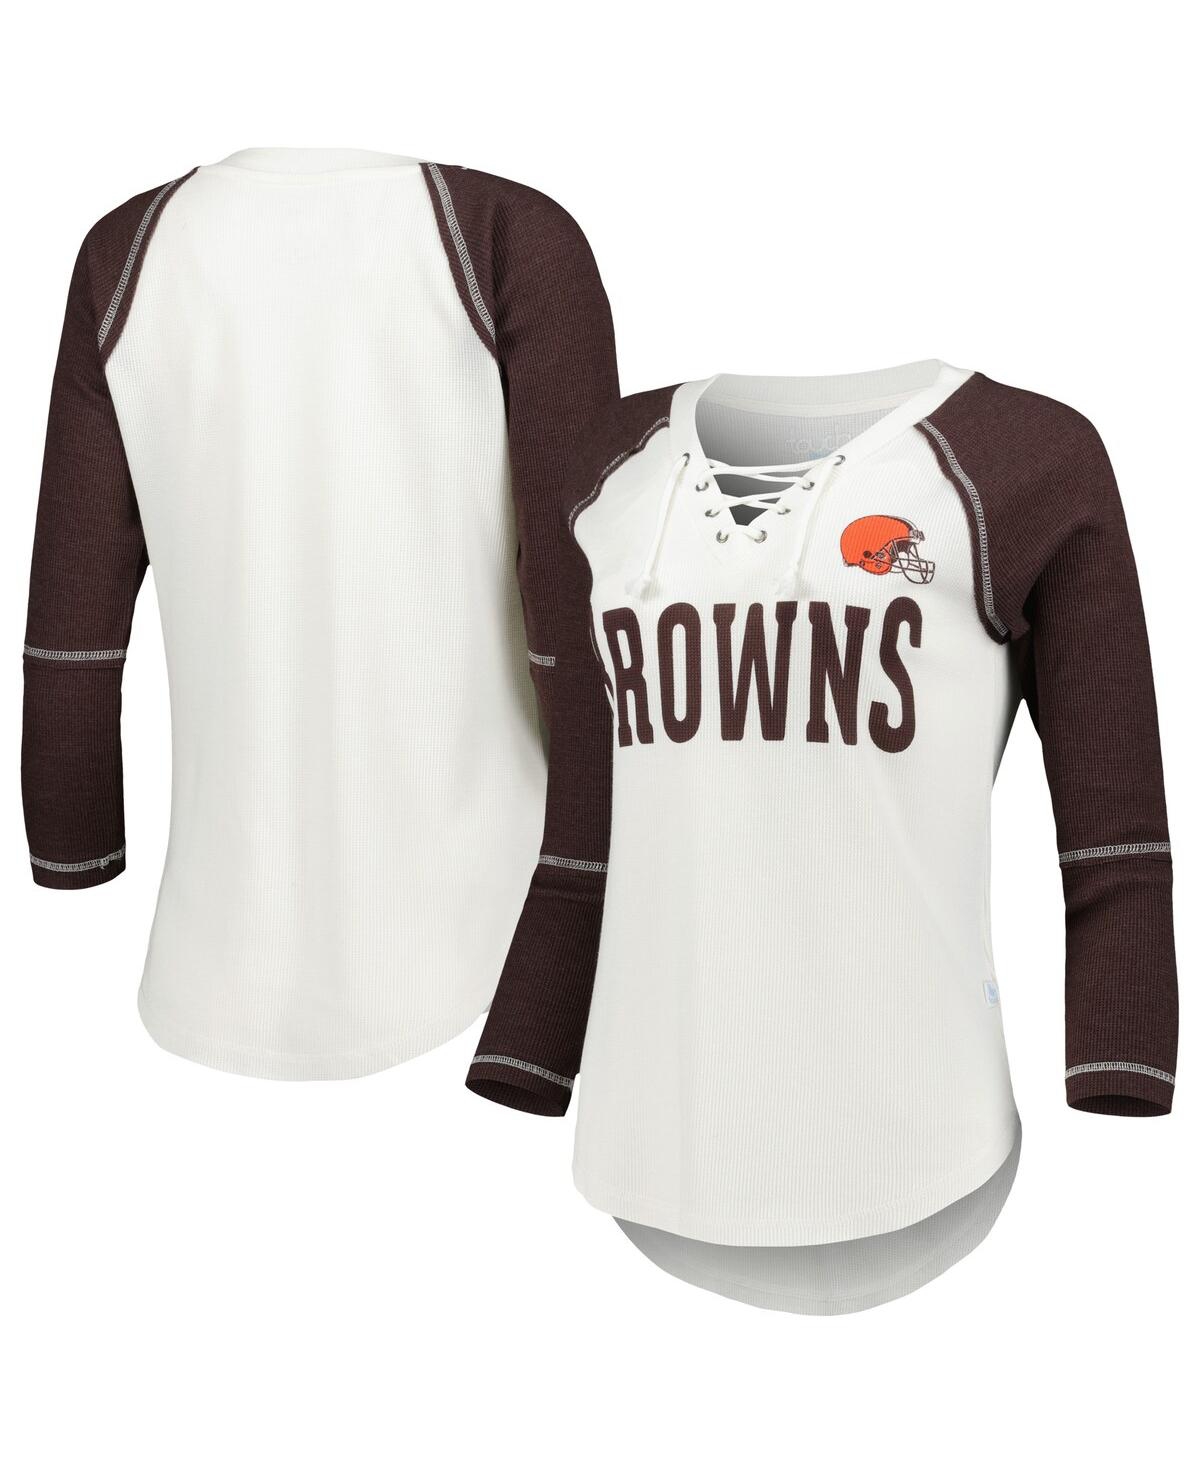 Women's Touch White, Brown Cleveland Browns Rebel Raglan Three-Quarter Sleeve Lace-Up V-Neck T-shirt - White, Brown